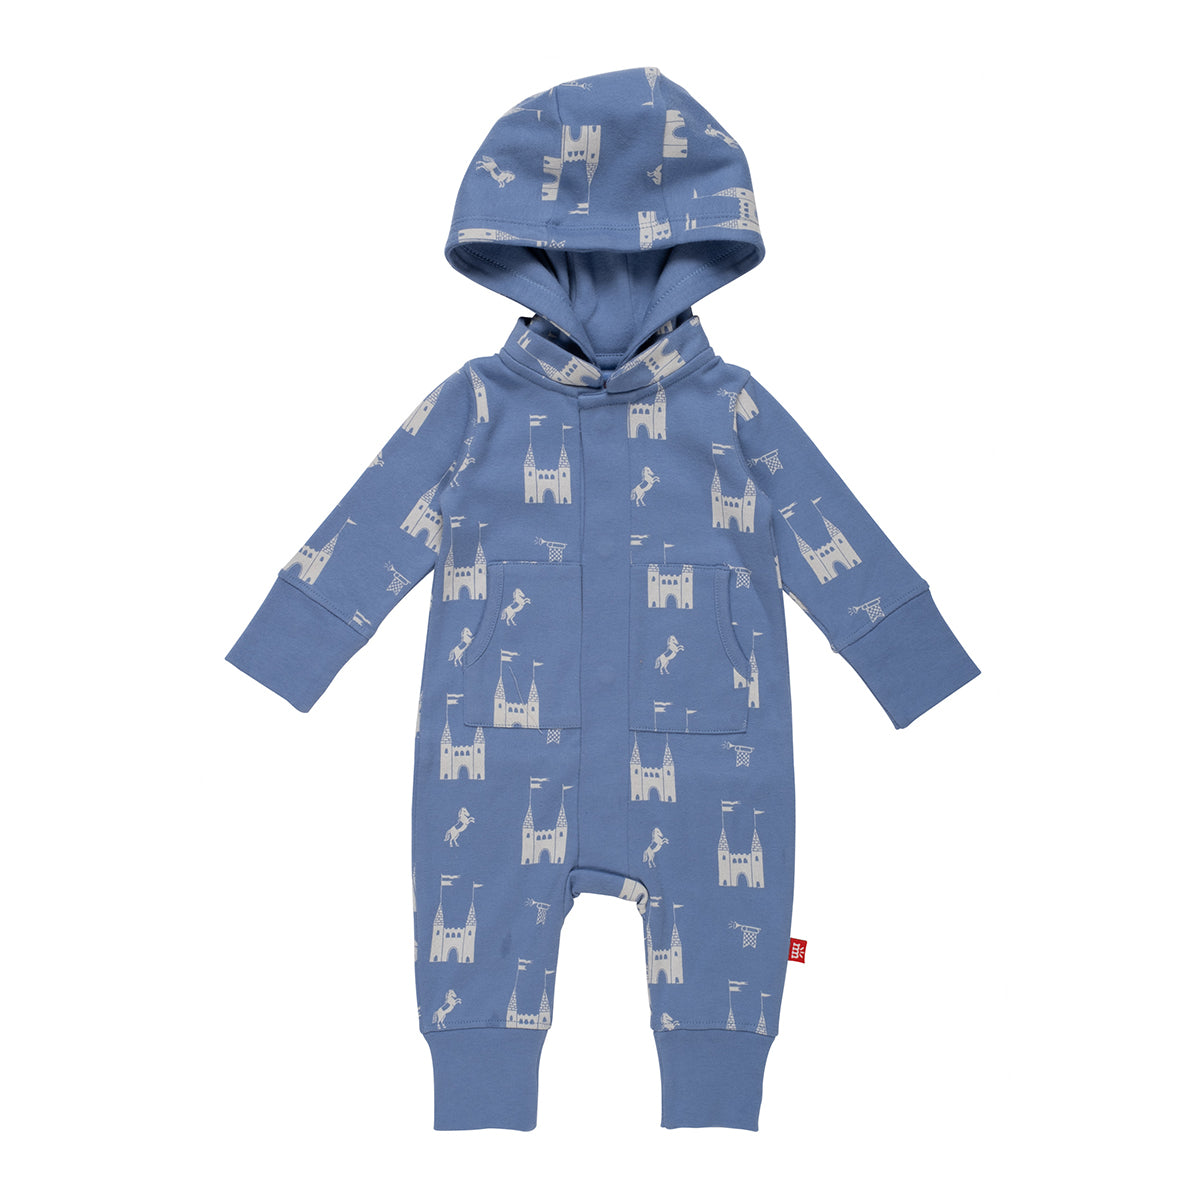 Magnetic Me Balmoral of the Story Baby Boy's Hooded Romper